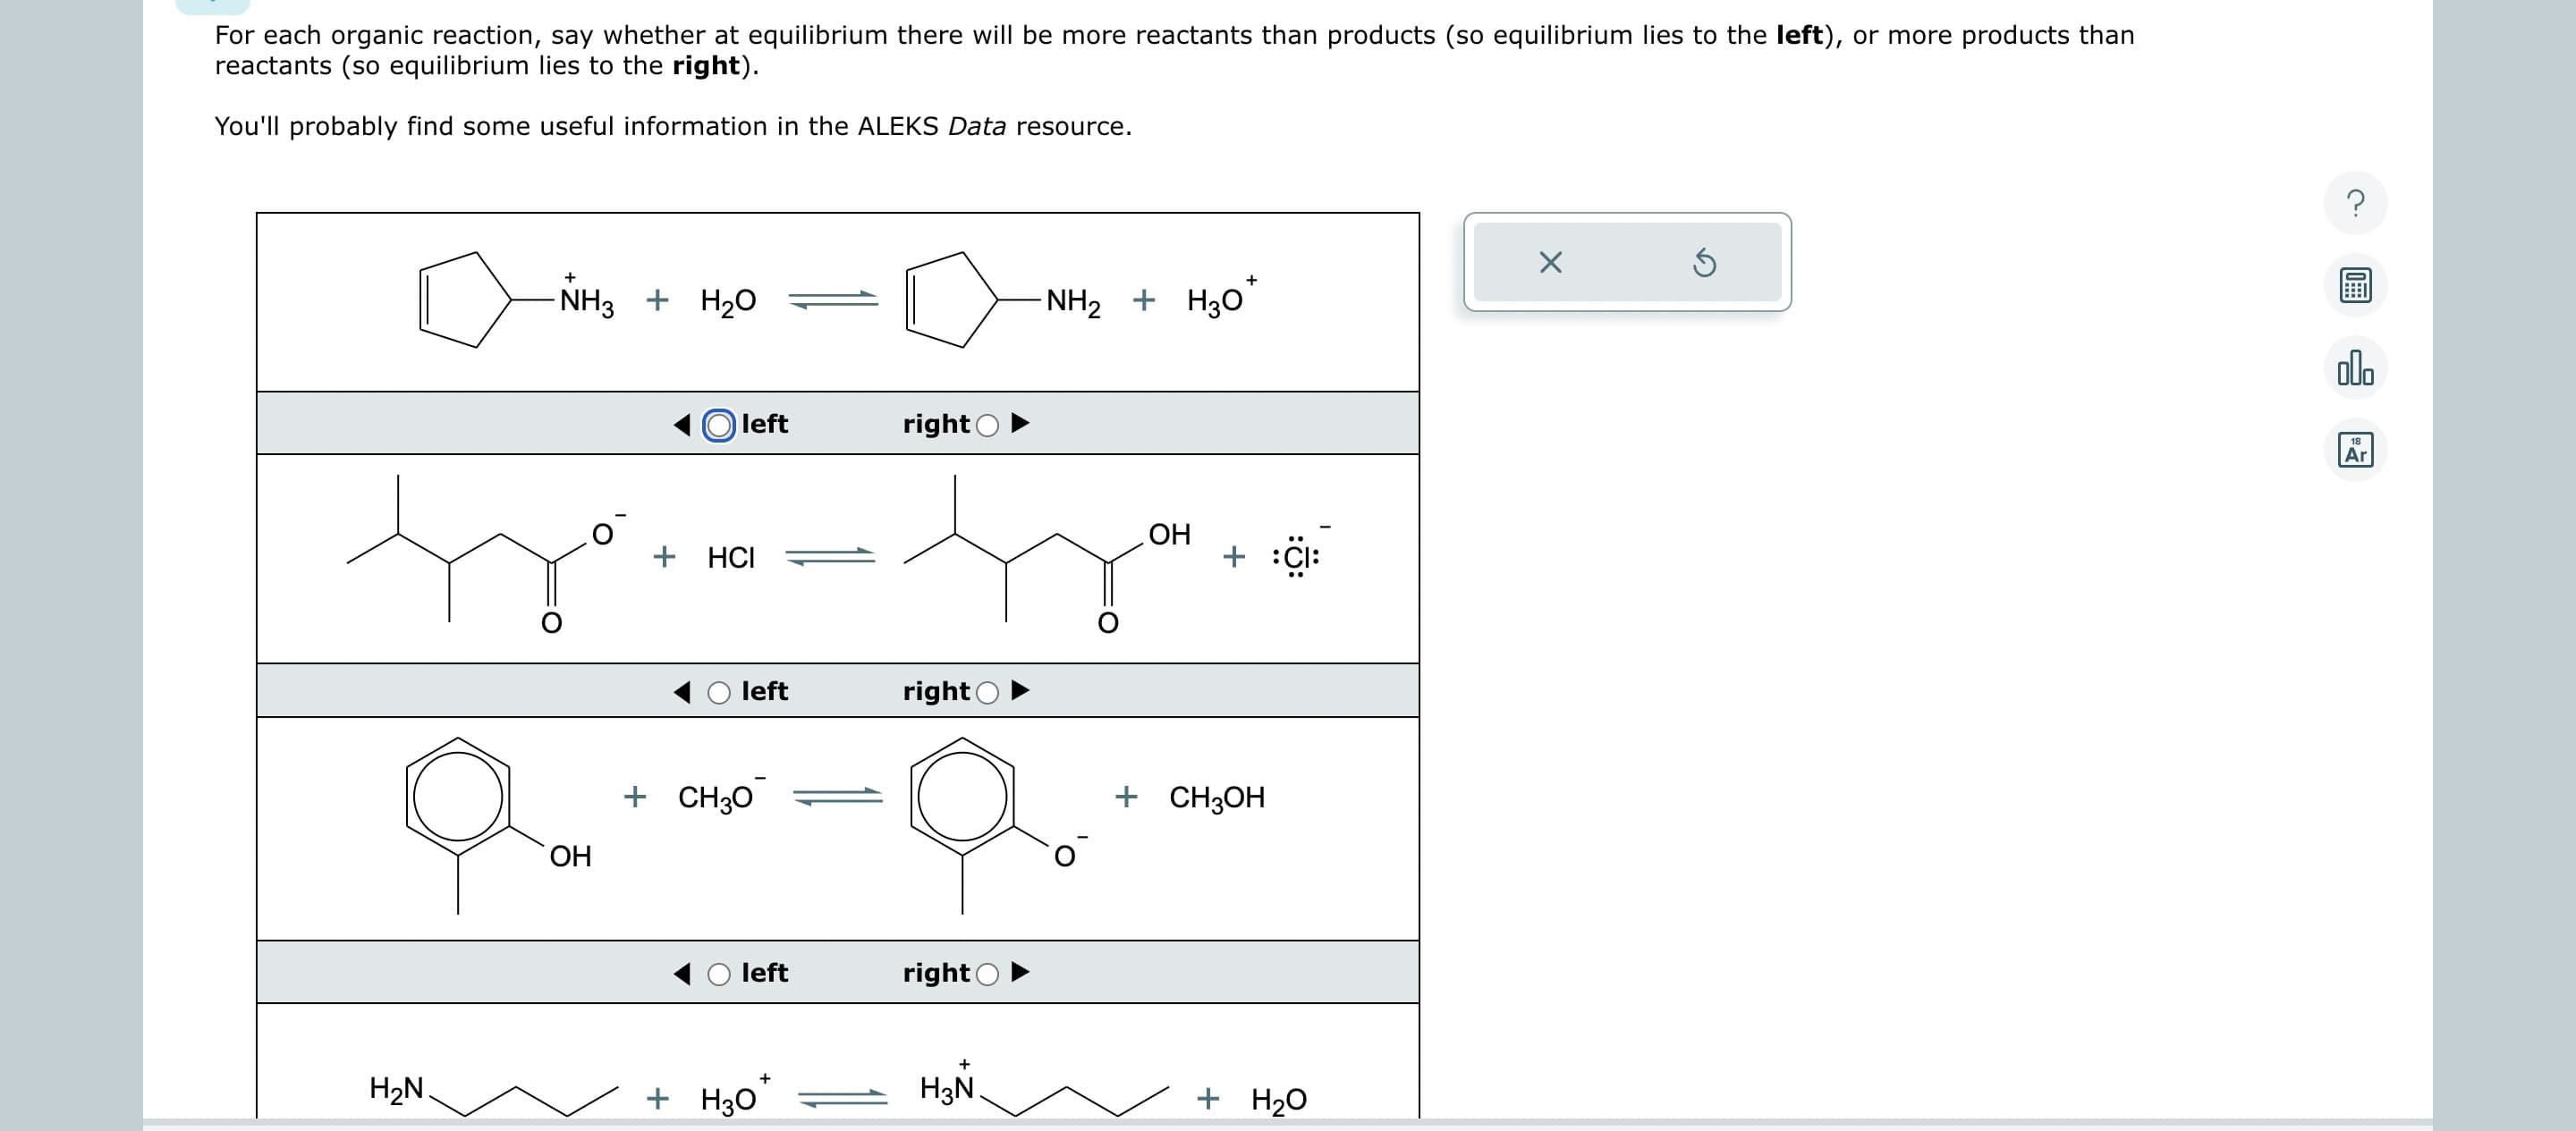 For each organic reaction, say whether at equilibrium there will be more reactants than products (so equilibrium lies to the left), or more products than
reactants (so equilibrium lies to the right).
You'll probably find some useful information in the ALEKS Data resource.
H₂N.
+
-NH3 + H₂O
OH
left
+ HCI
left
+ CH3O
left
+
+ H3O
right
right
right
+
H3N
NH2 + H3O
OH
+
+ Cl
+ CH3OH
+ H₂O
X
Ś
?
000
18
Ar